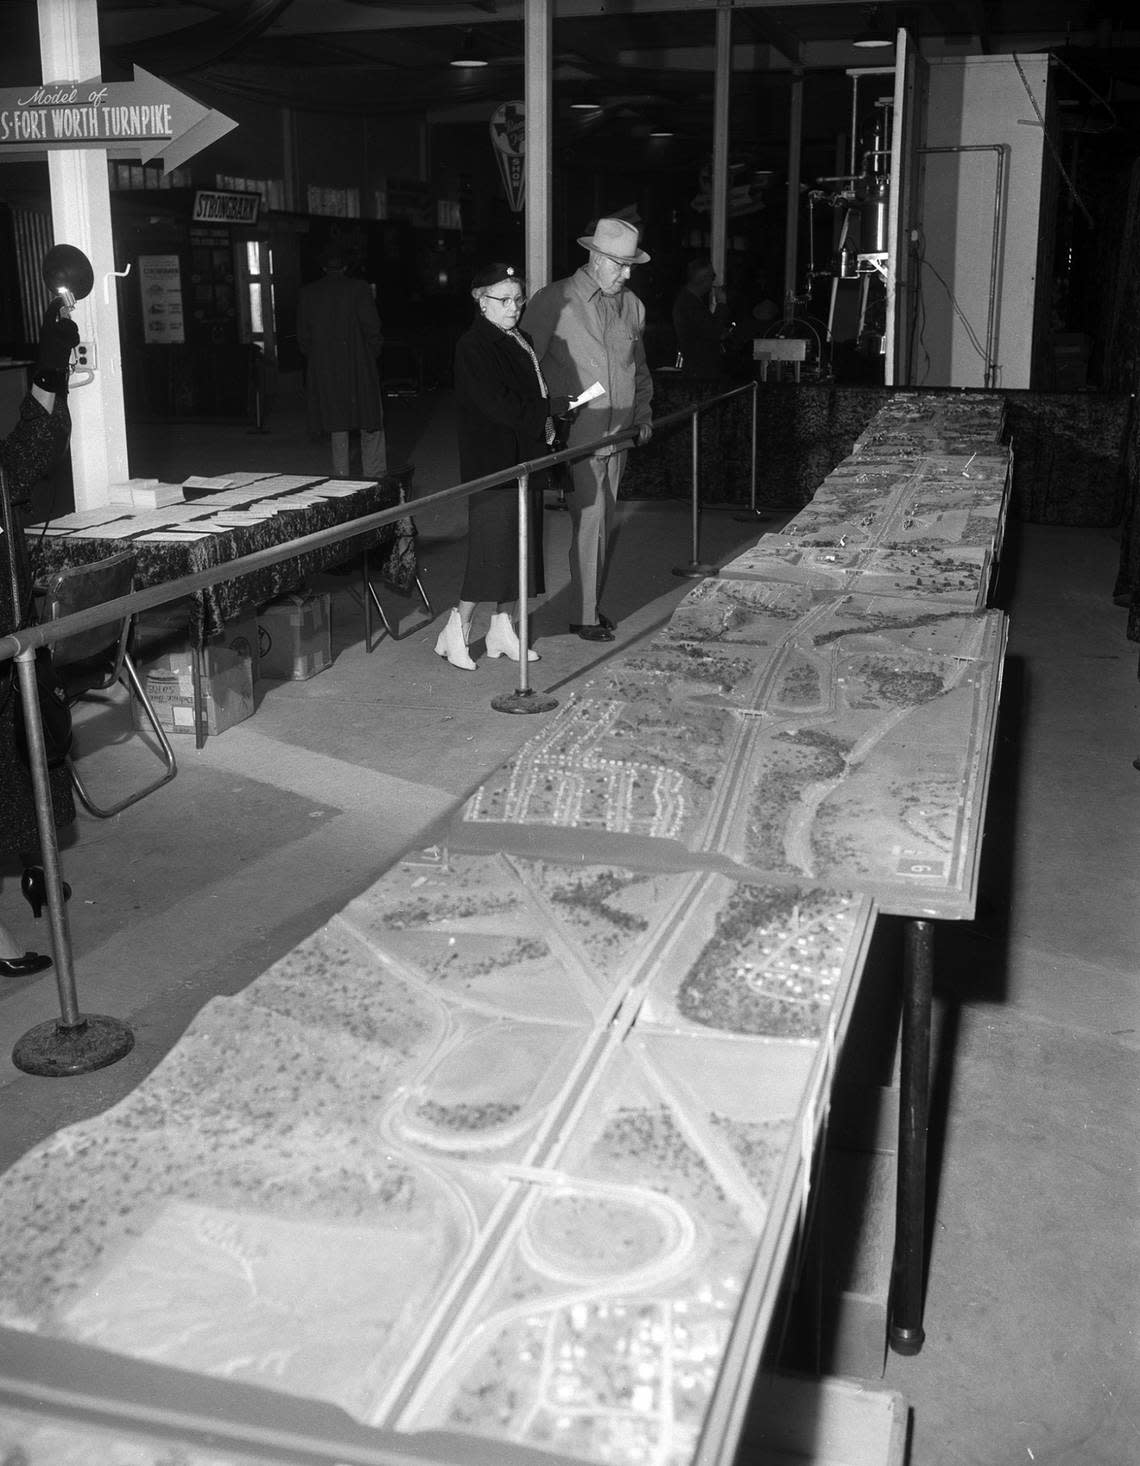 July 31, 1956: Mr. and Mrs. A.F. Buck look at a scale model of the proposed Dallas-Fort Worth Turnpike at the Southwestern Exposition and Fat Stock Show (today the Fort Worth Stock Show & Rodeo)